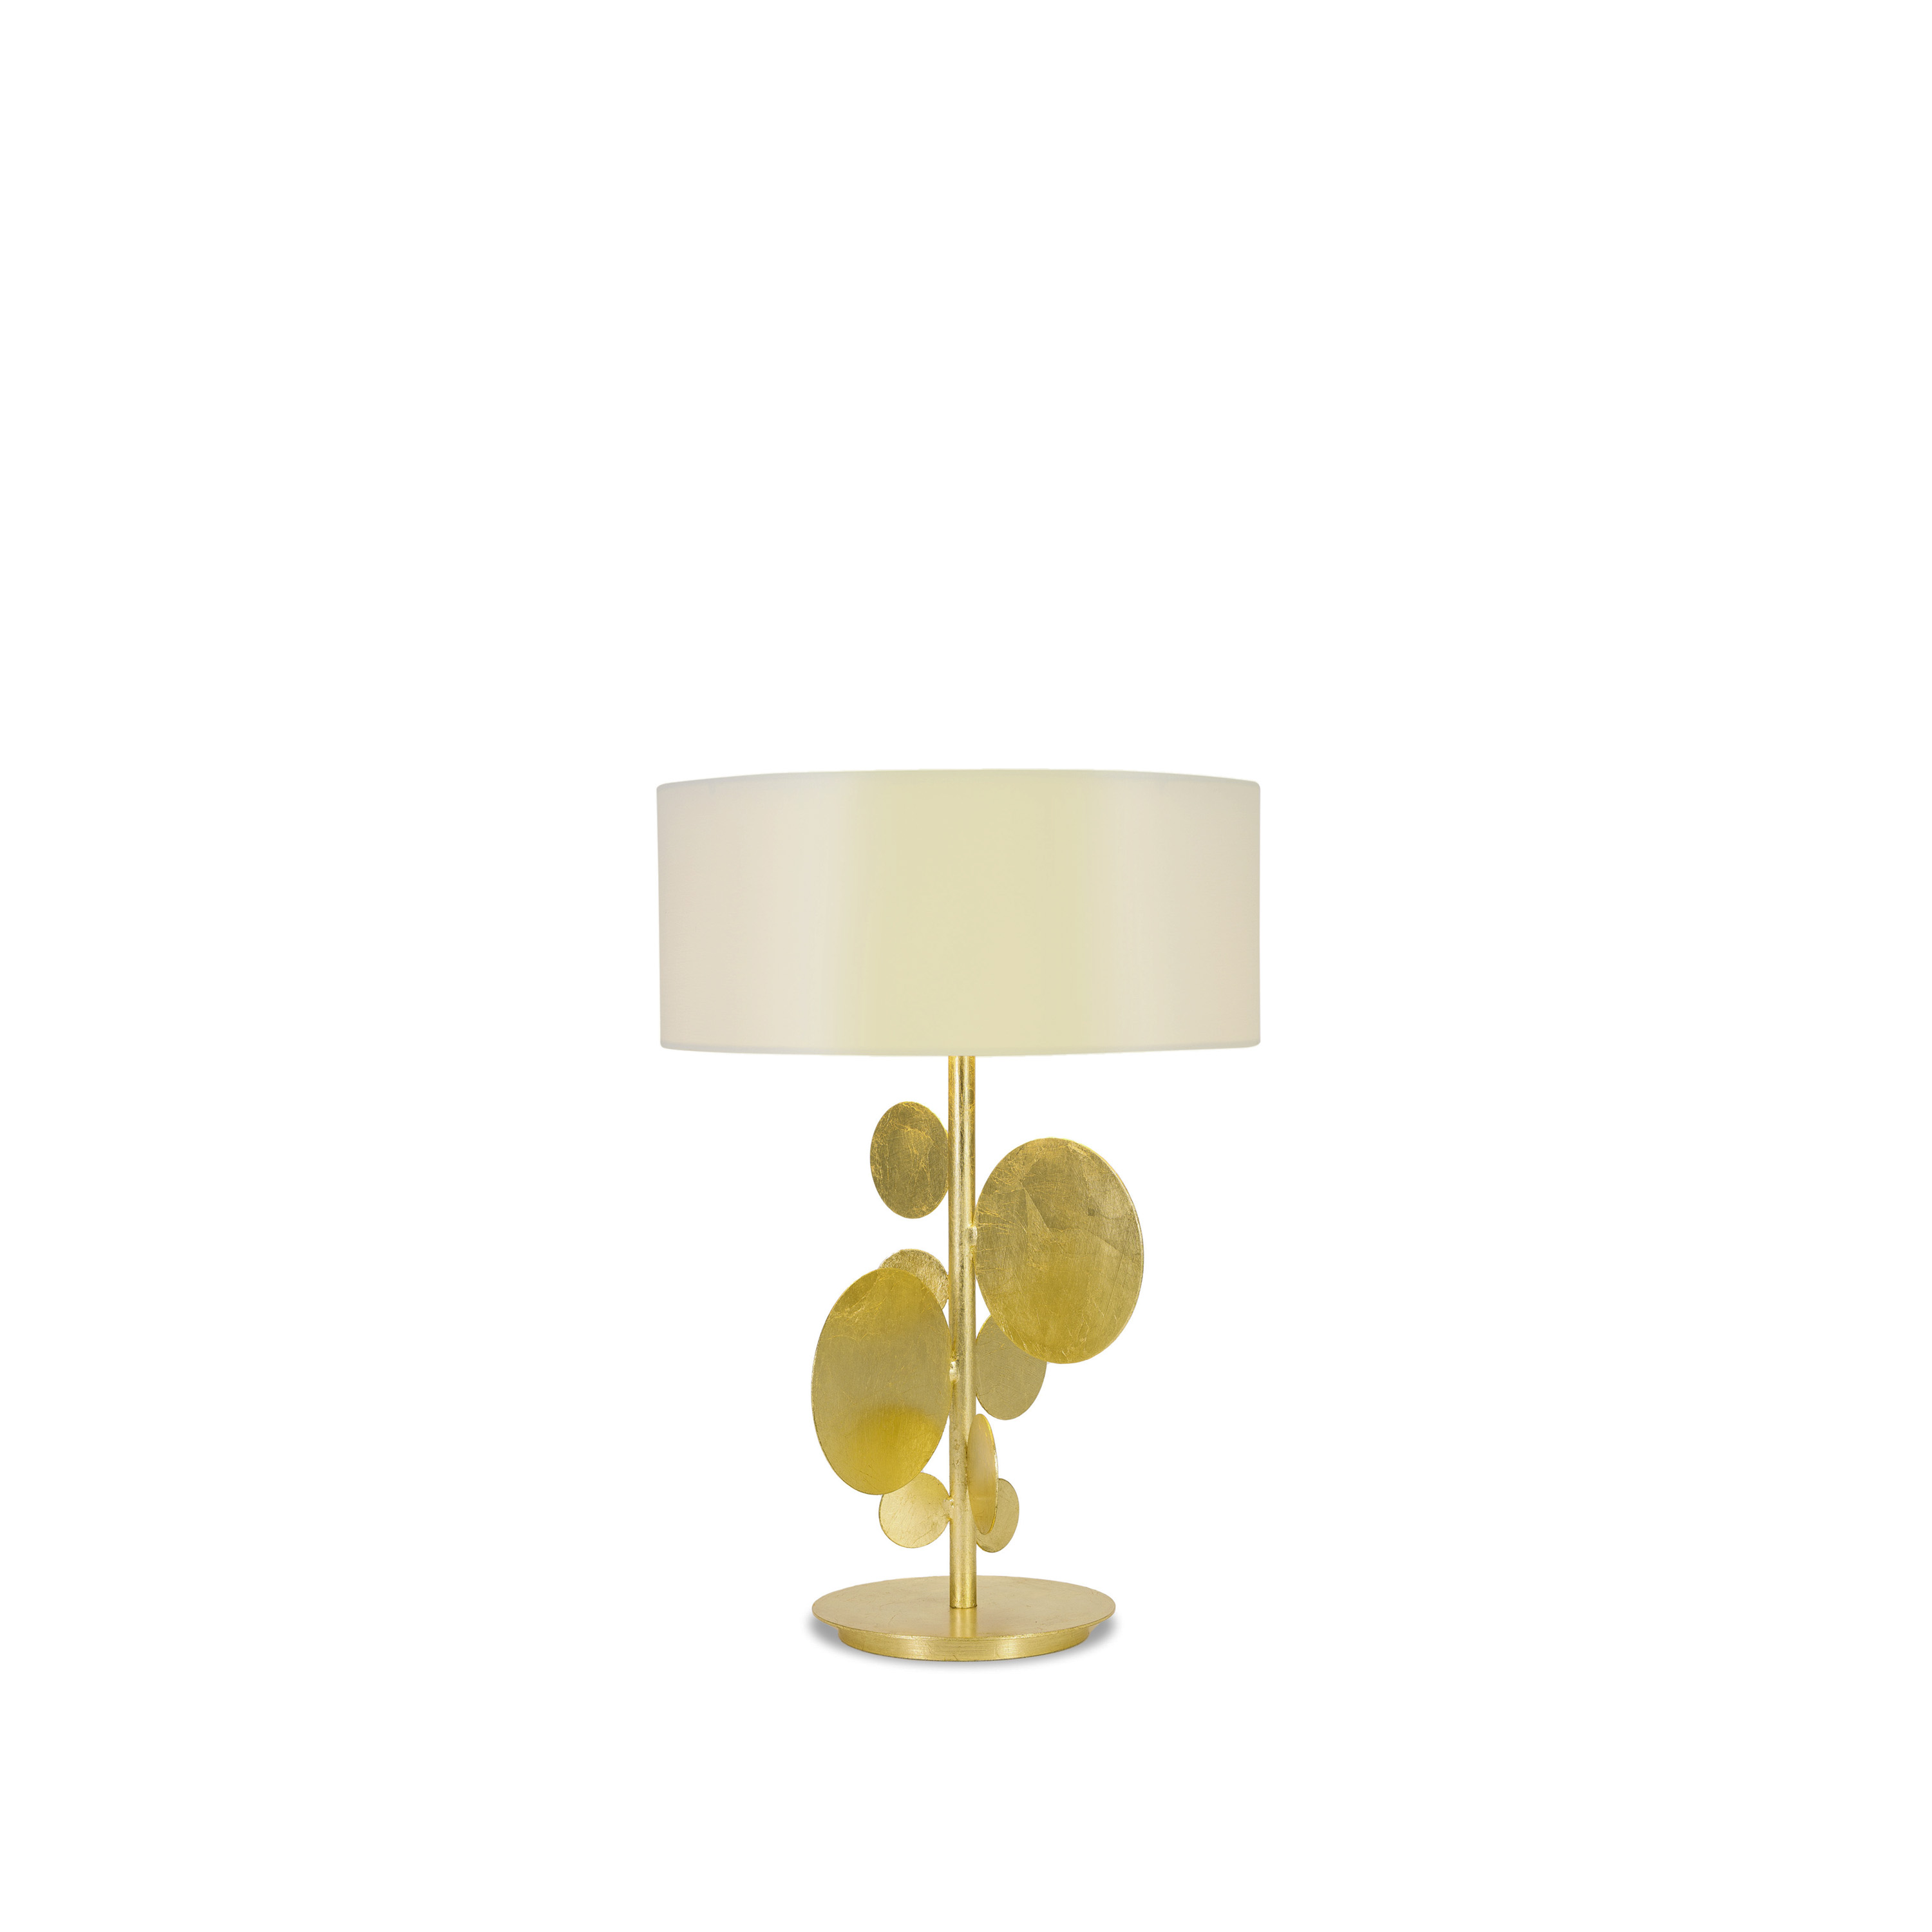 Orion - Small table lamp